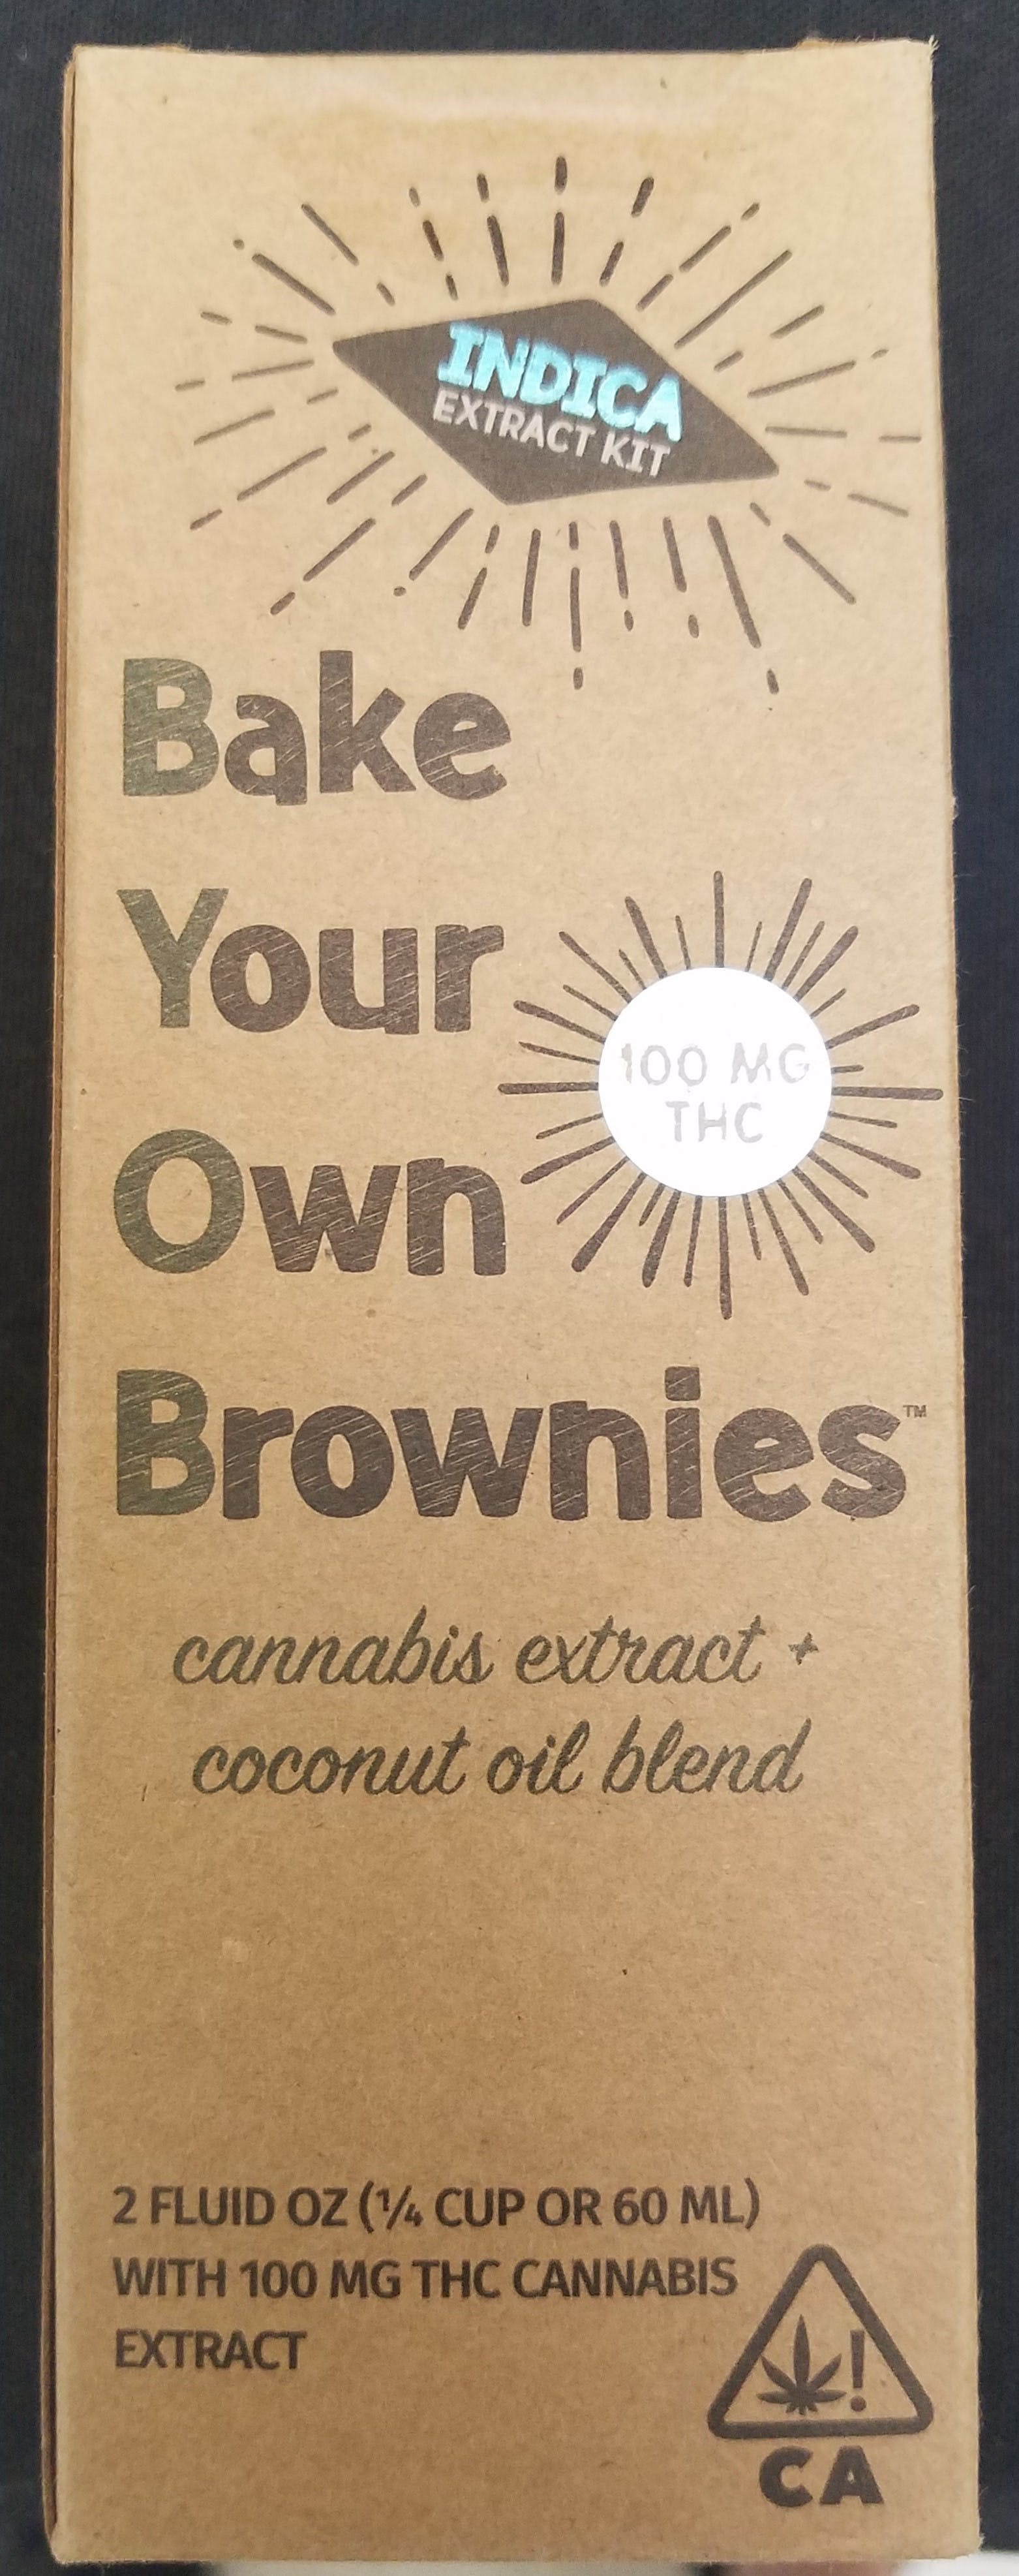 edible-bake-your-own-brownies-indica-extract-kit